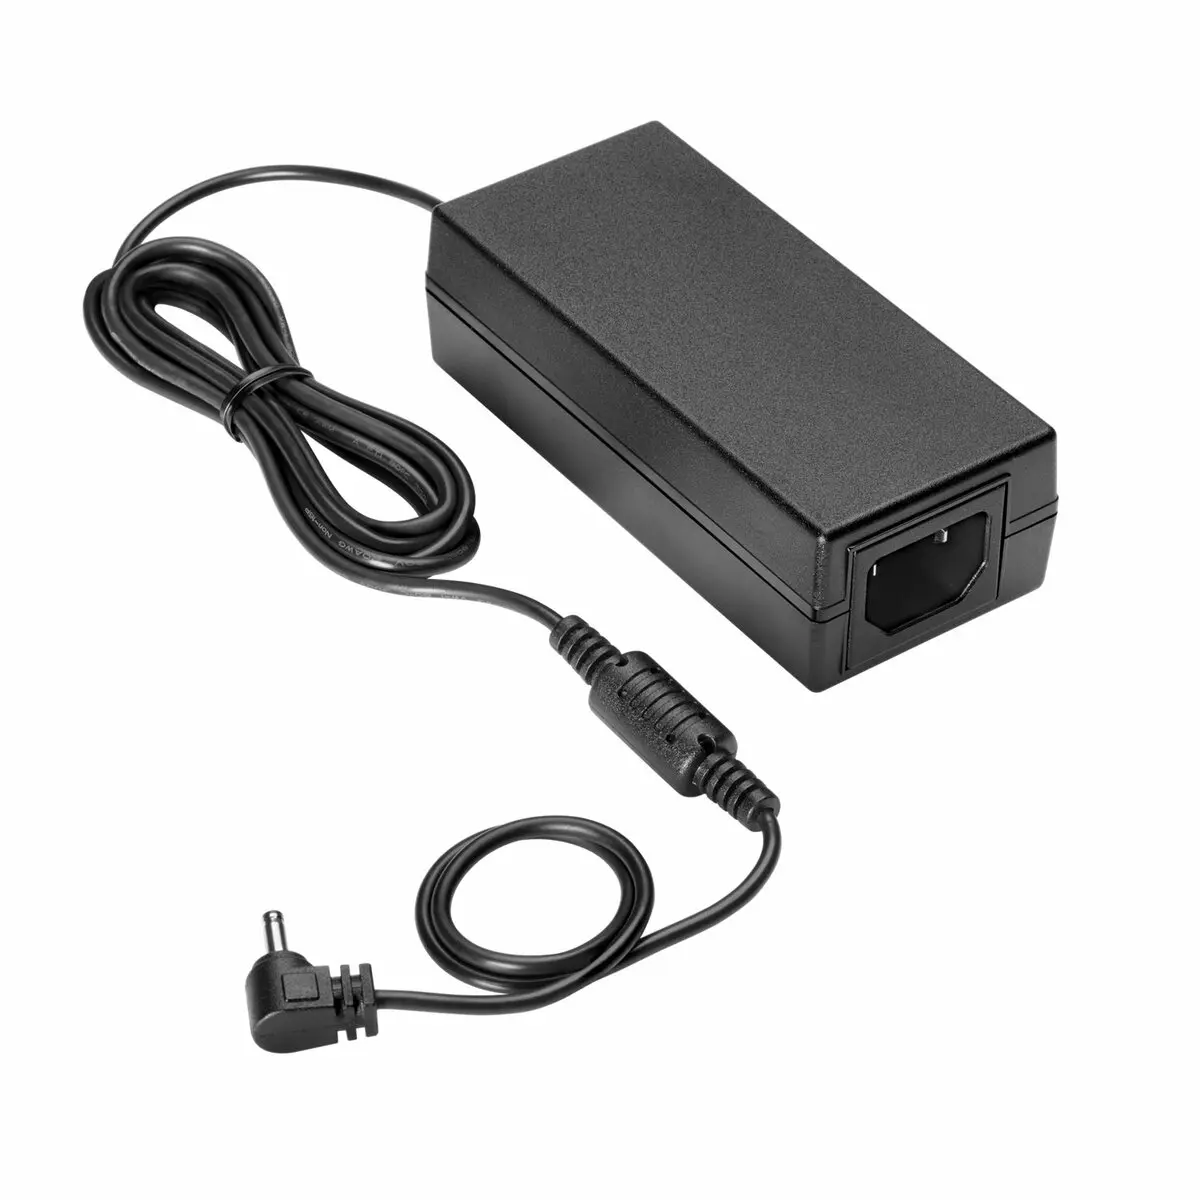 HPE Aruba 48V Power Adaptor For AP11D And AP17 Specifically Designed Stable Power Supply Easy Installation Compact Form Factor